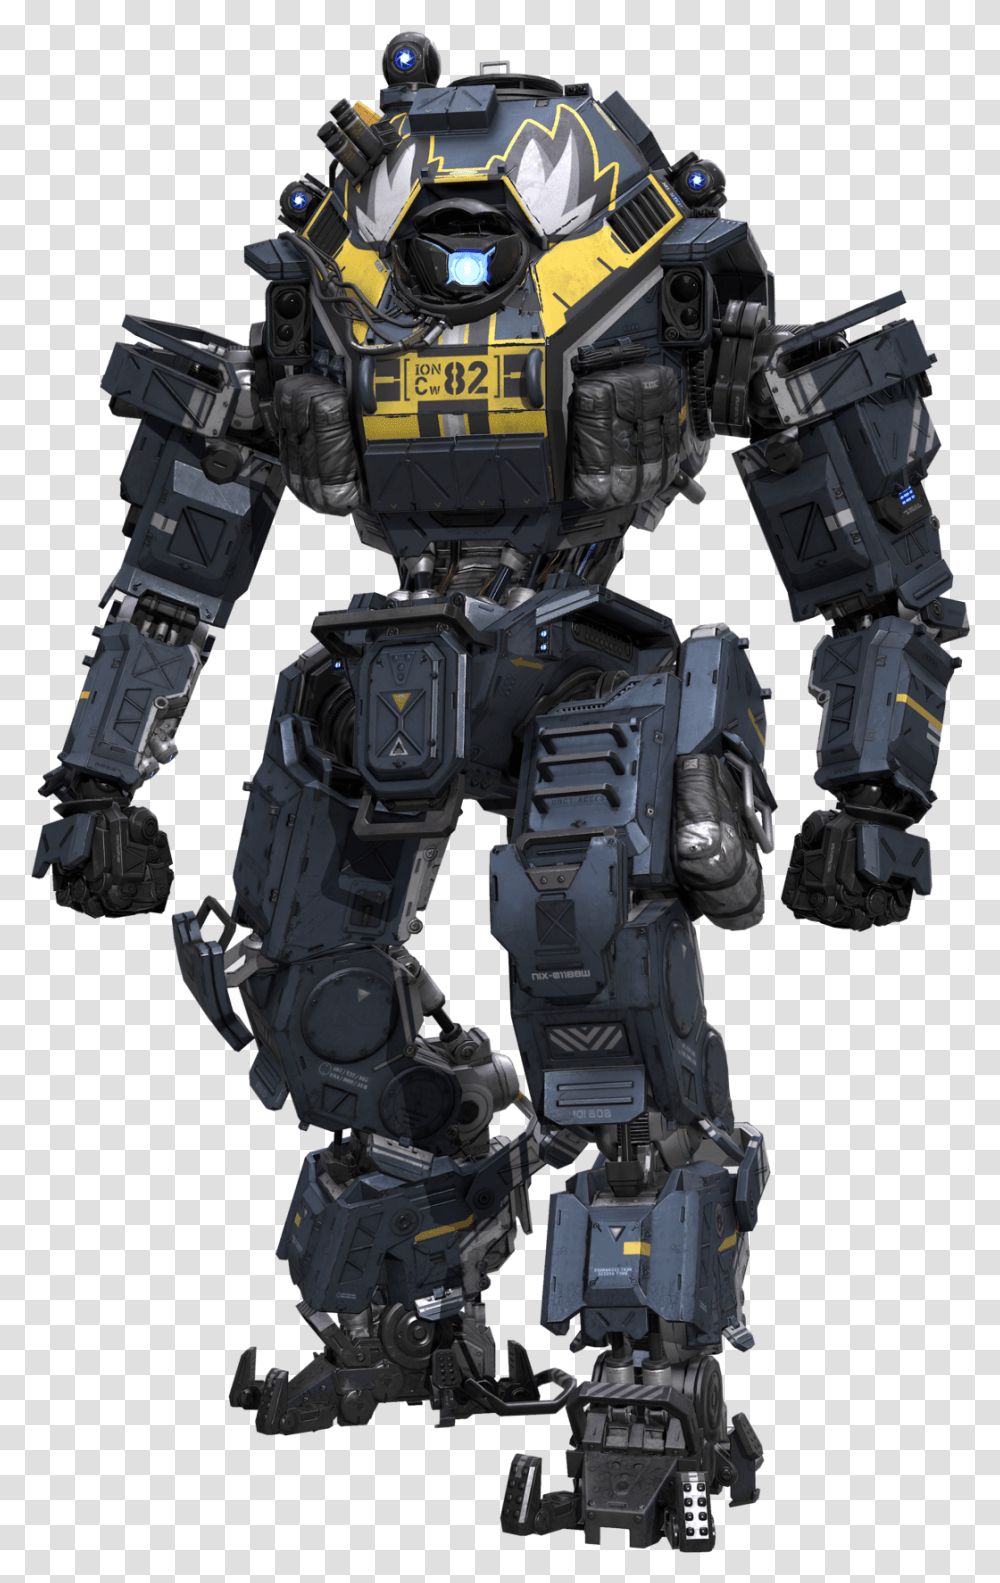 For An Exclusive Bww Nose Art For Ion Titanfall 2 Buffalo Wild Wings, Toy, Robot Transparent Png